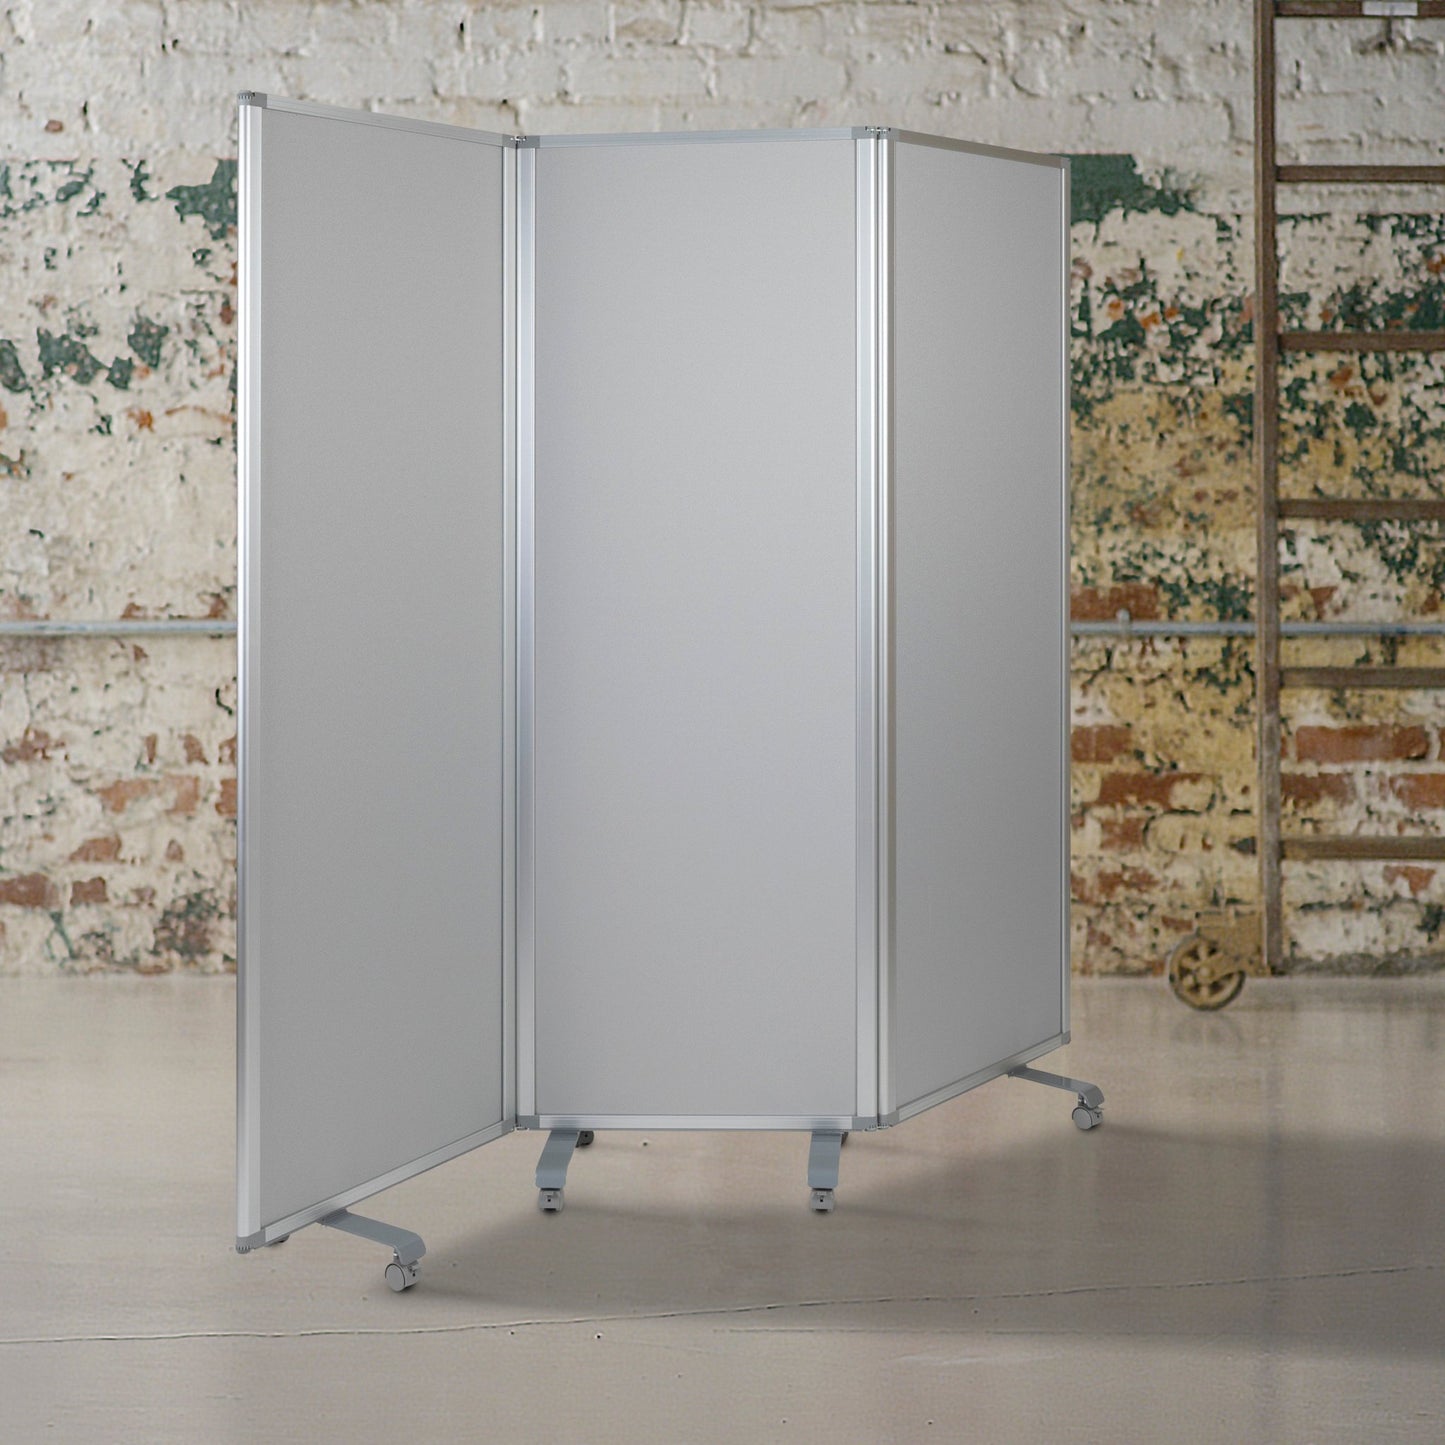 Raisley Double Sided Mobile Magnetic Whiteboard/Cloth Partition with Lockable Casters, 72"H x 24"W (3 sections included) - SchoolOutlet